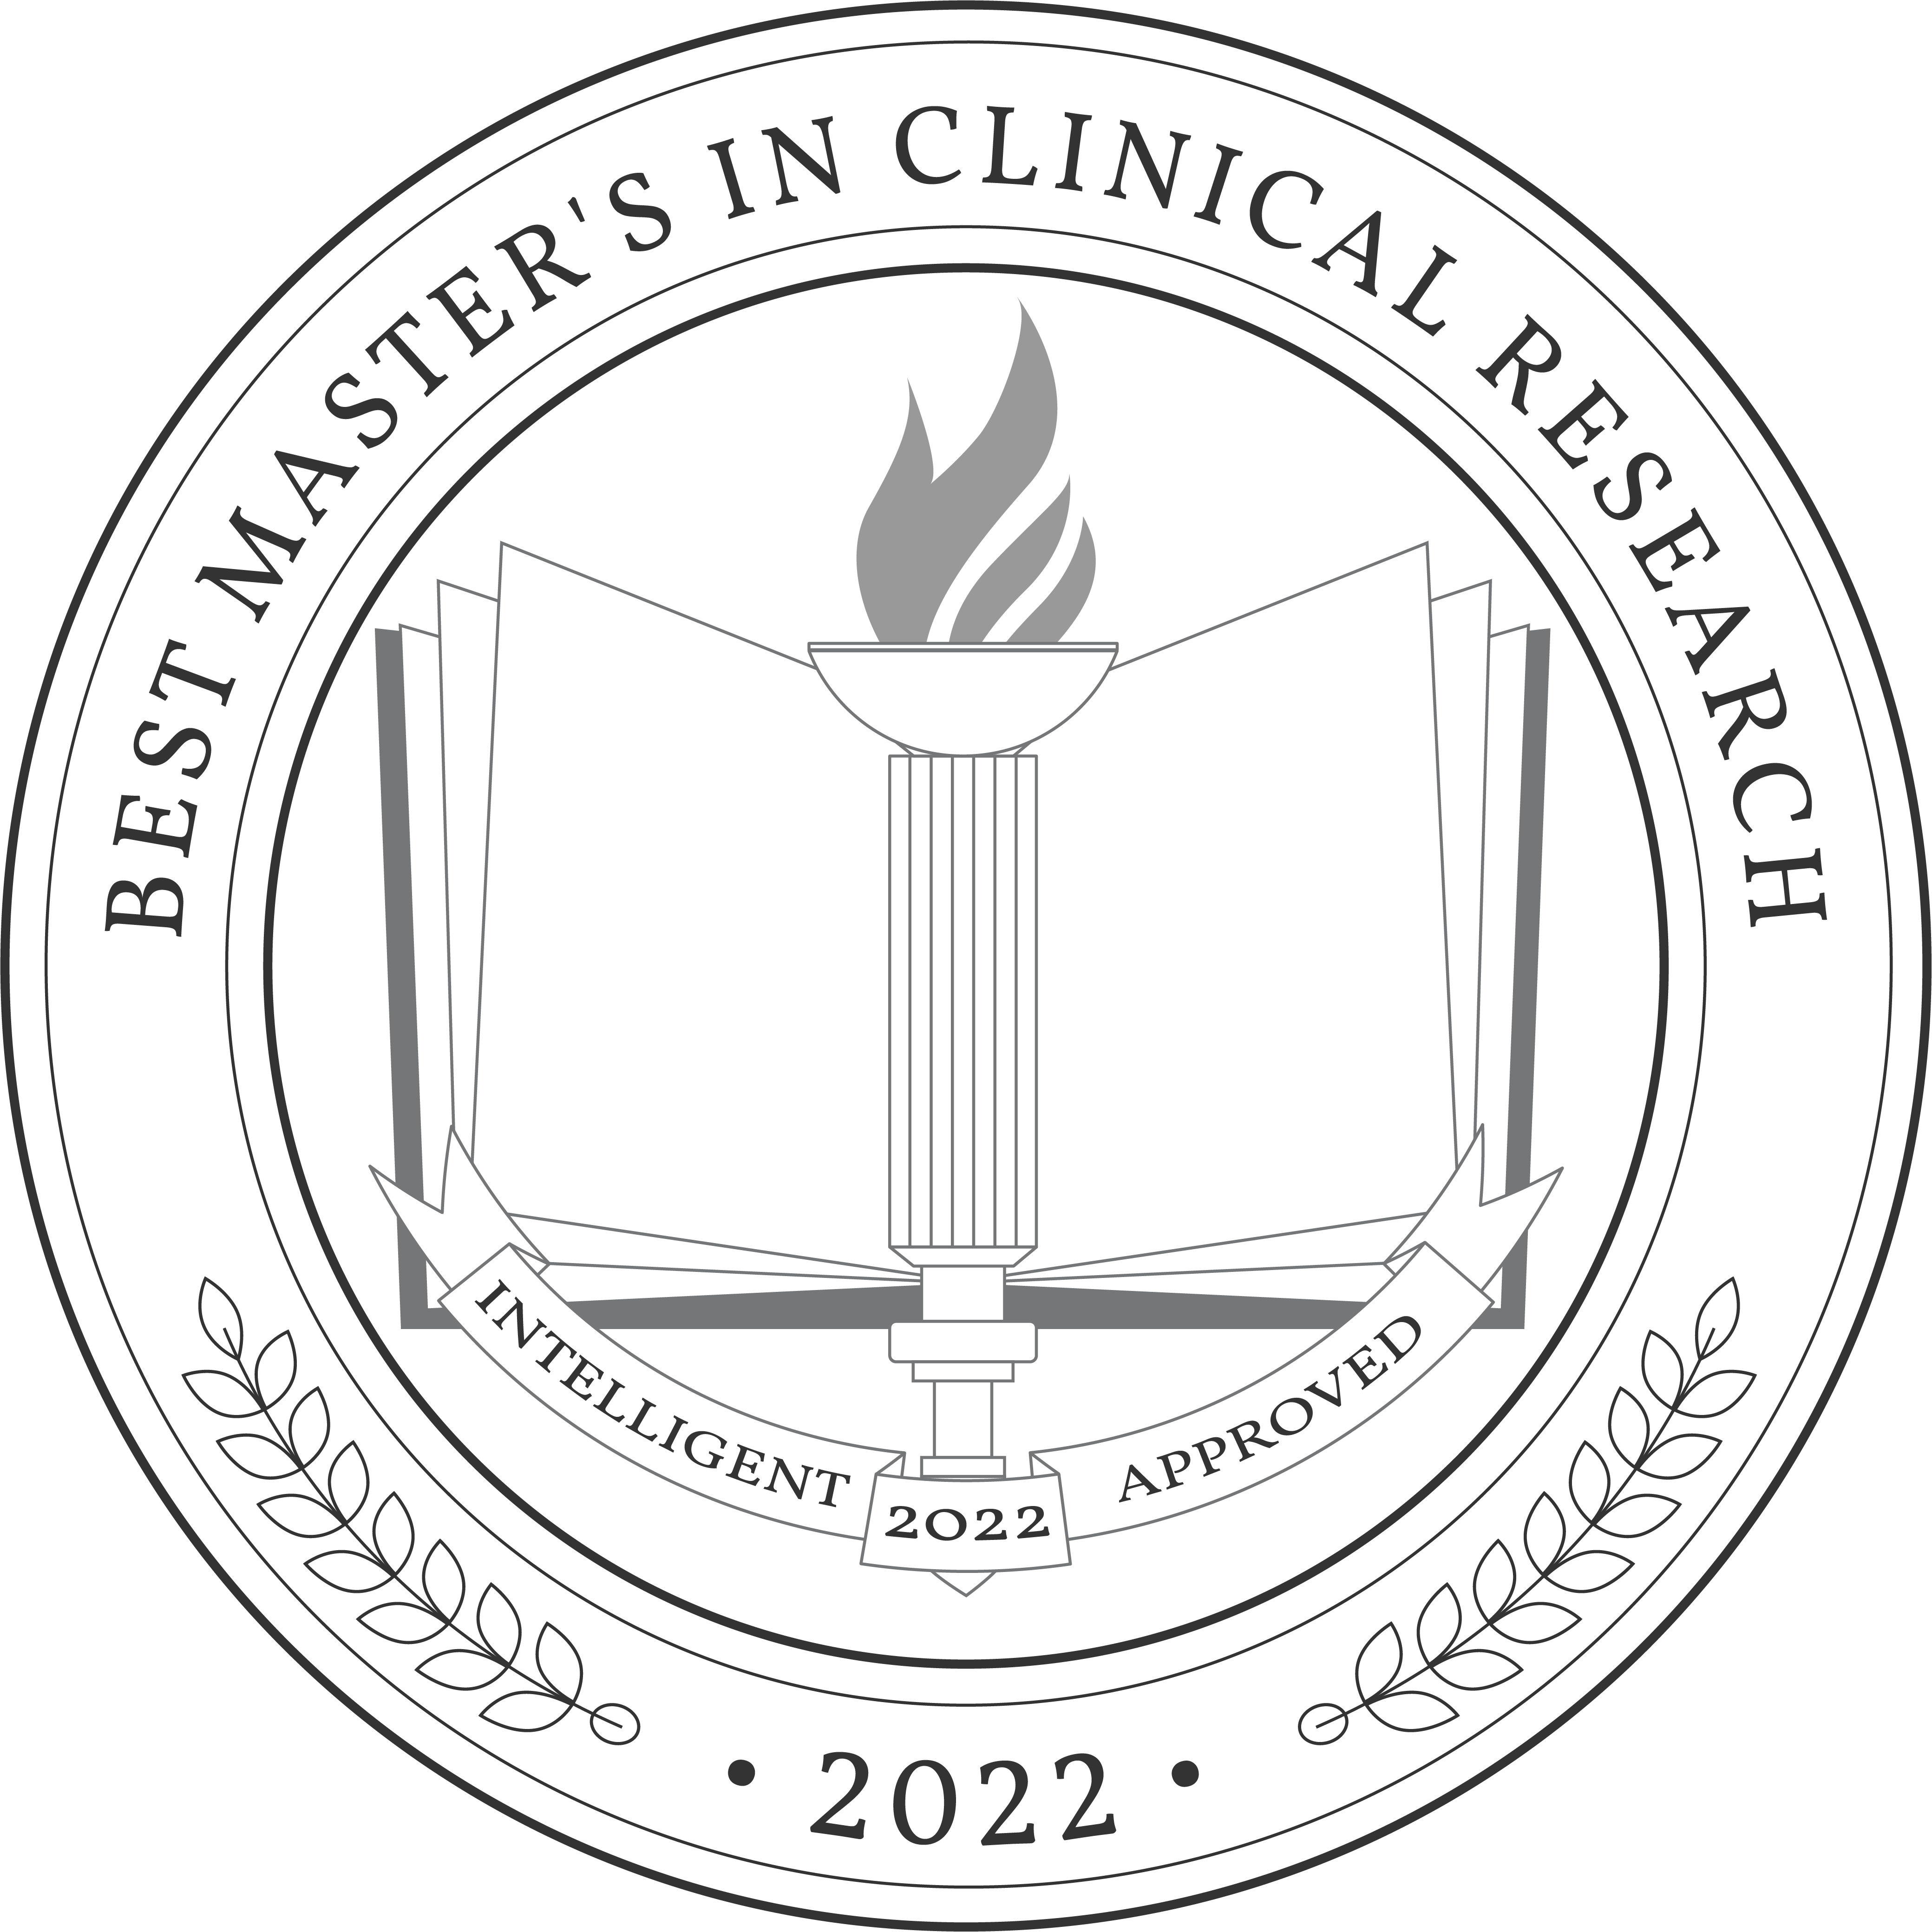 Best Master's in Clinical Research Badge